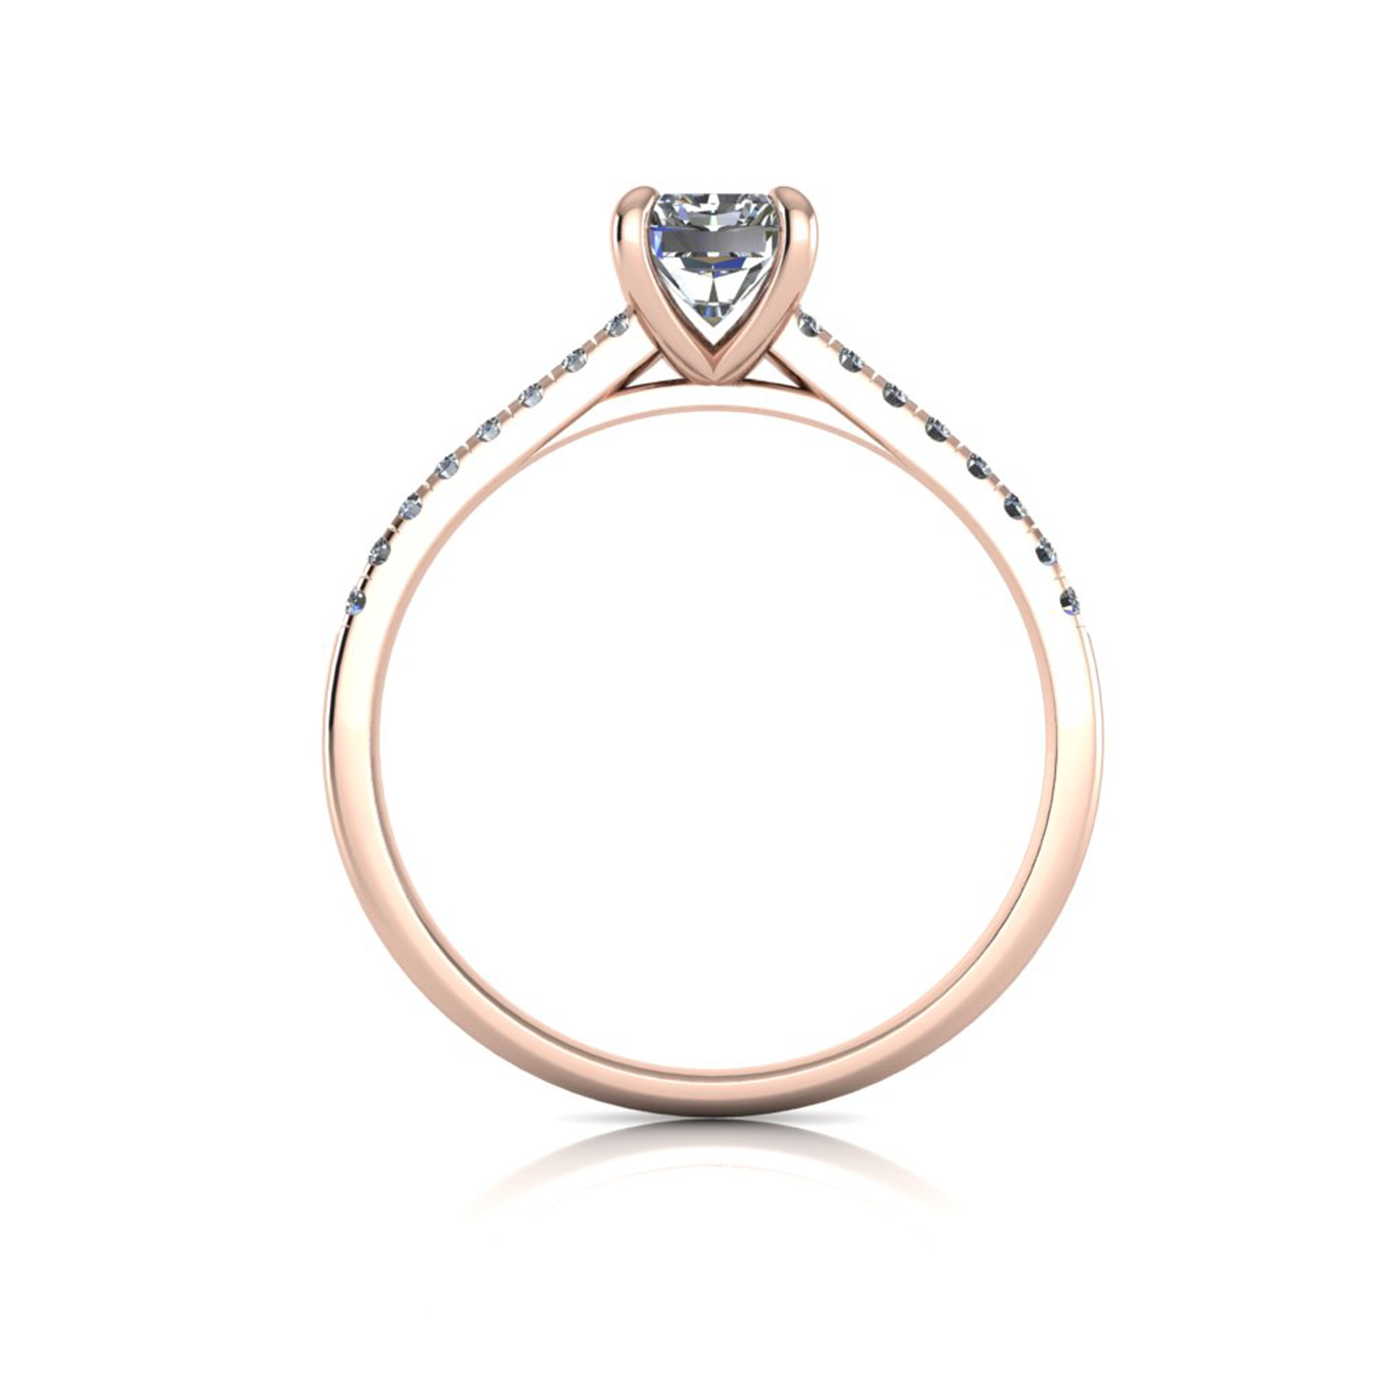 18k rose gold  0,80 ct 4 prongs radiant cut diamond engagement ring with whisper thin pavÉ set band